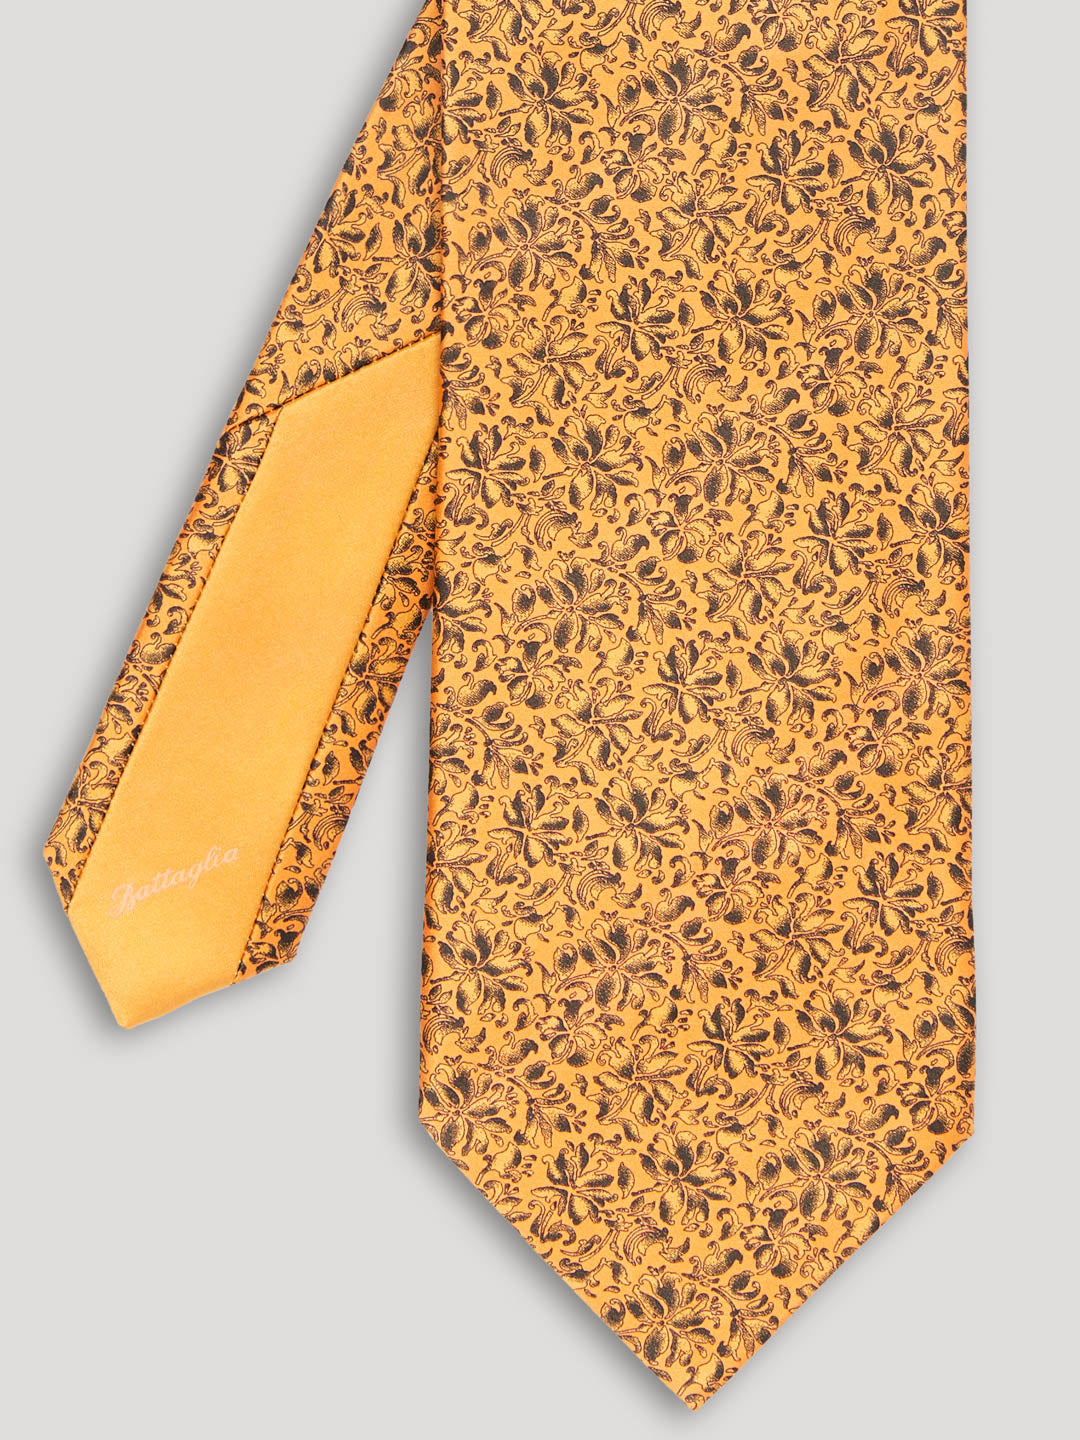 Golden yellow tie with black floral details. 